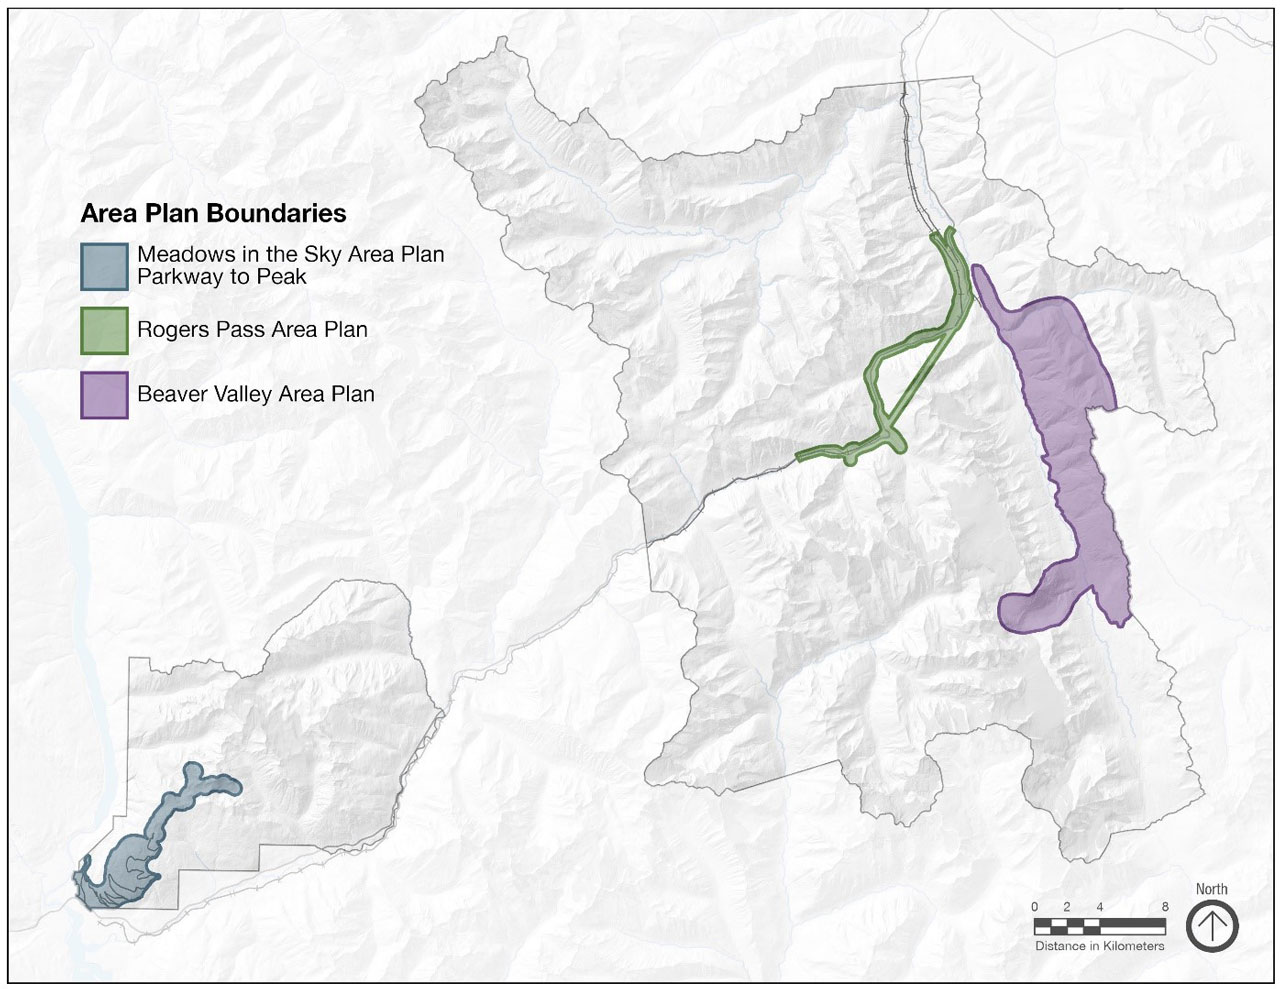 A map of the management areas identified for Mount Revelstoke and Glacier national parks including the Meadows in the Sky Parkway, Rogers Pass, and Beaver Valley.